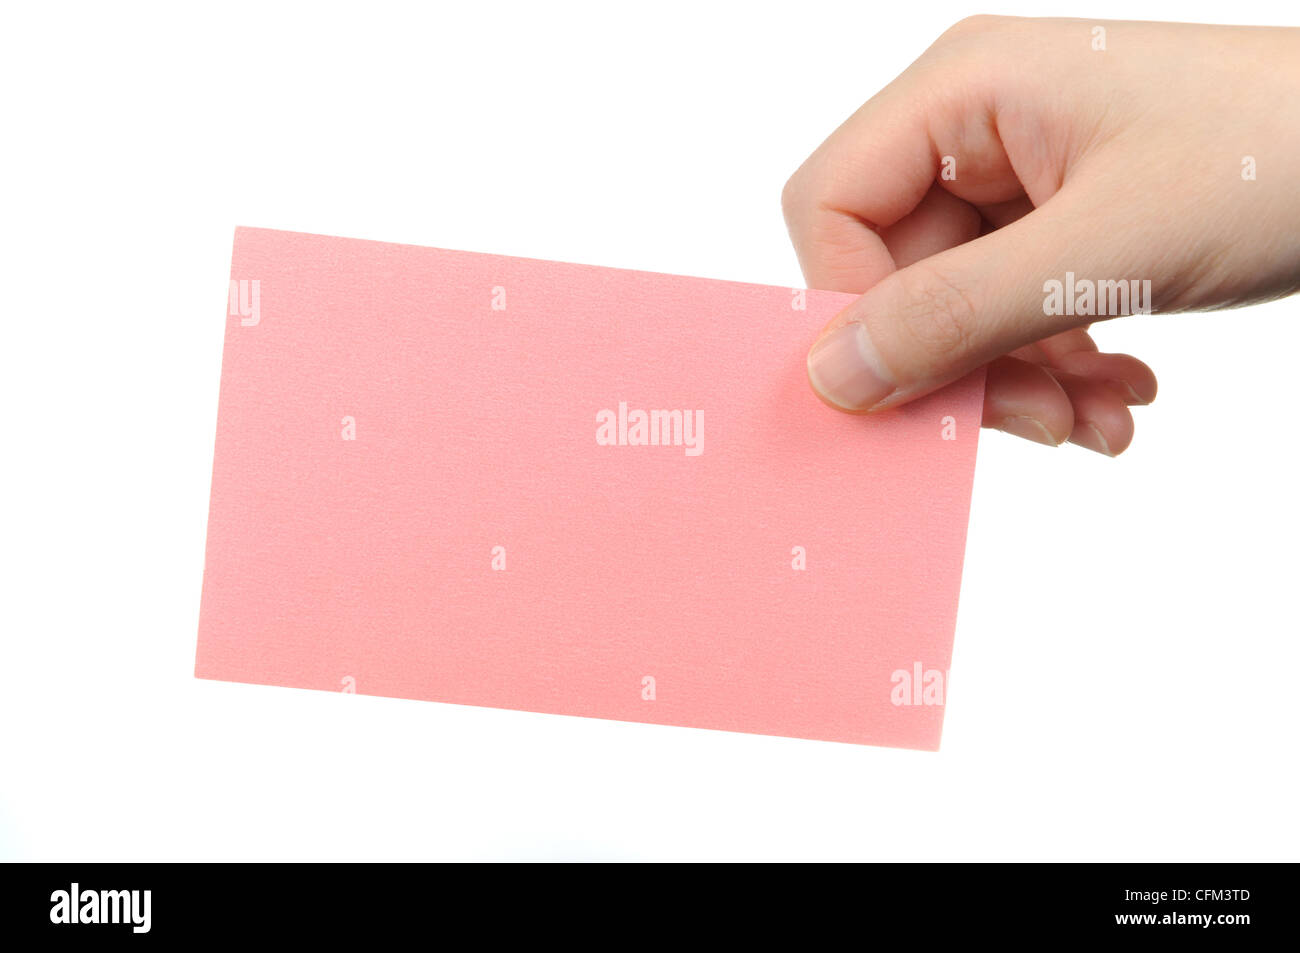 Empty pink business card in a woman's hand Stock Photo